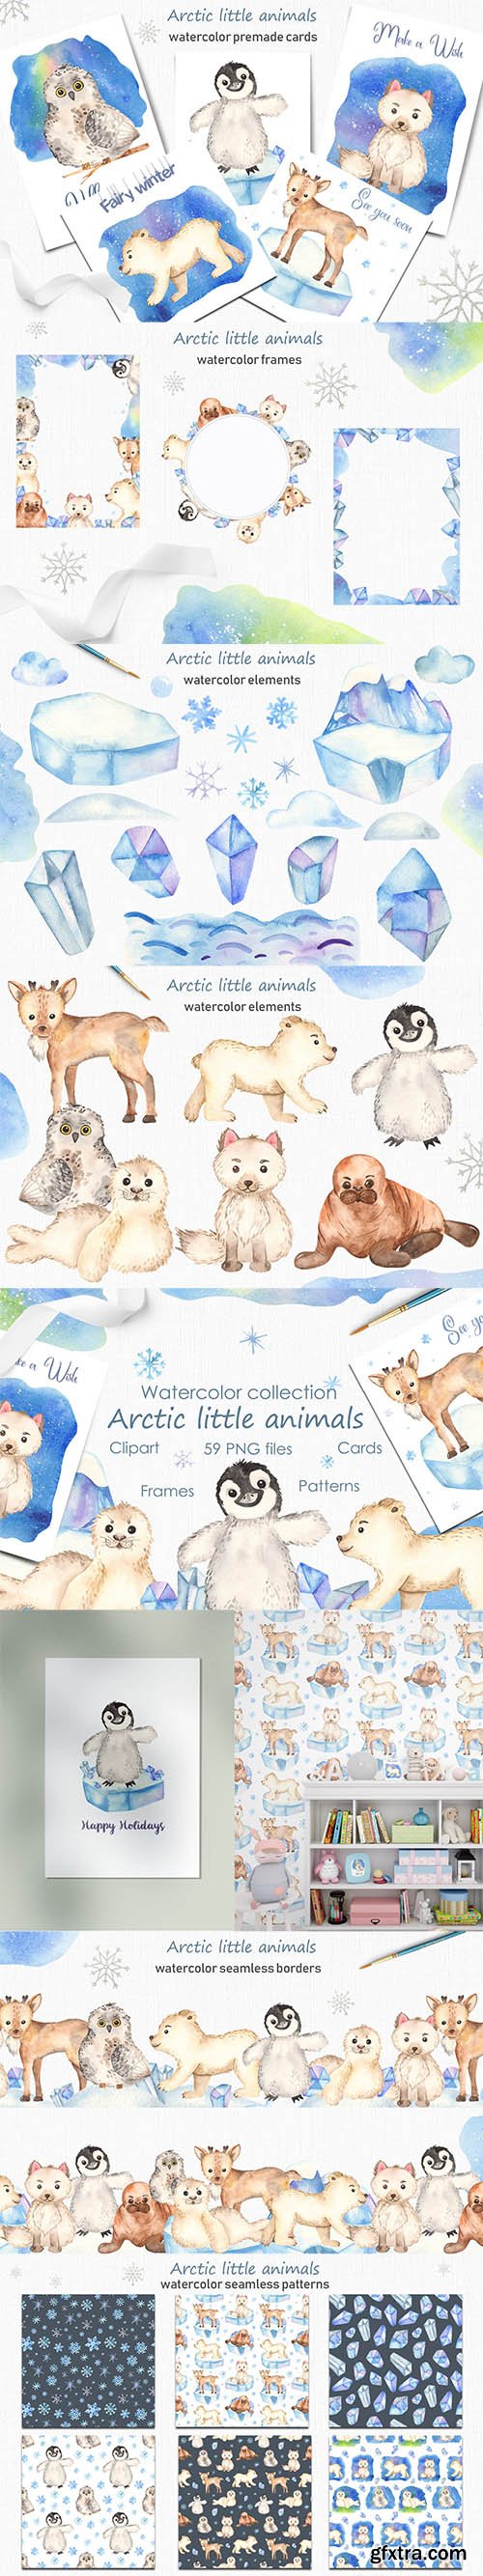 Watercolor Arctic little animals Clipart cards